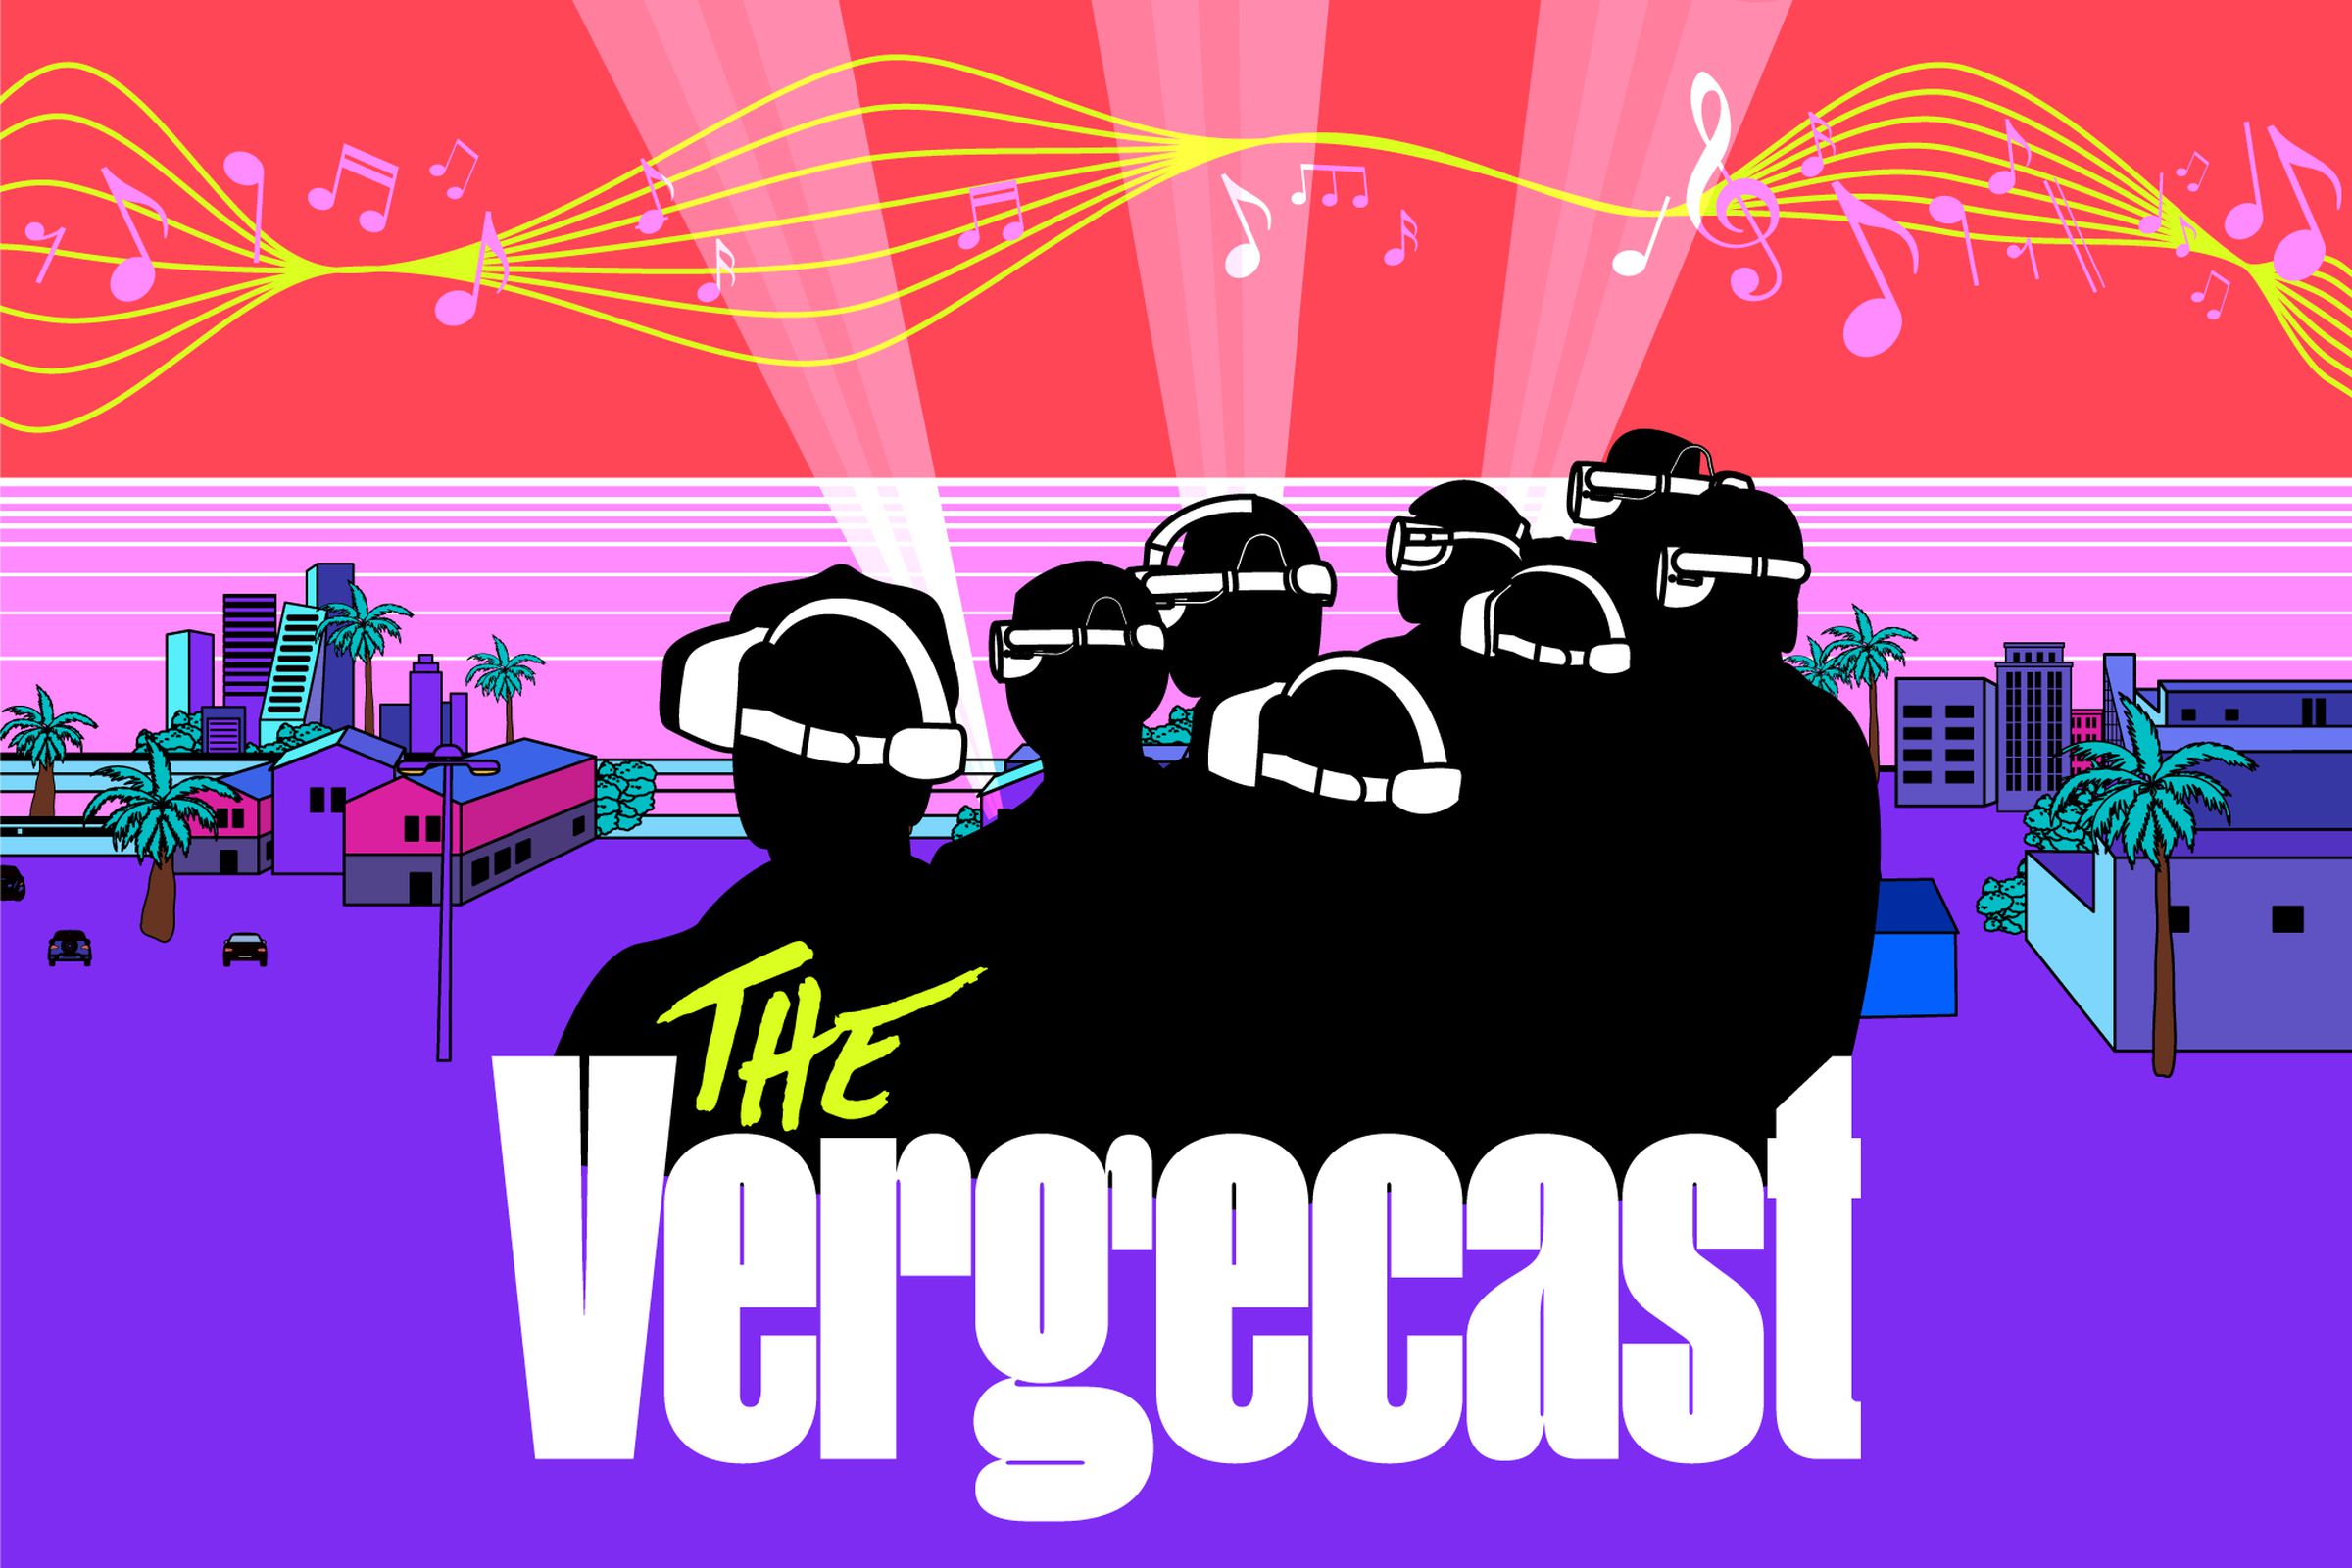 The Vergecast logo over an audience with VR headsets at a virtual concert